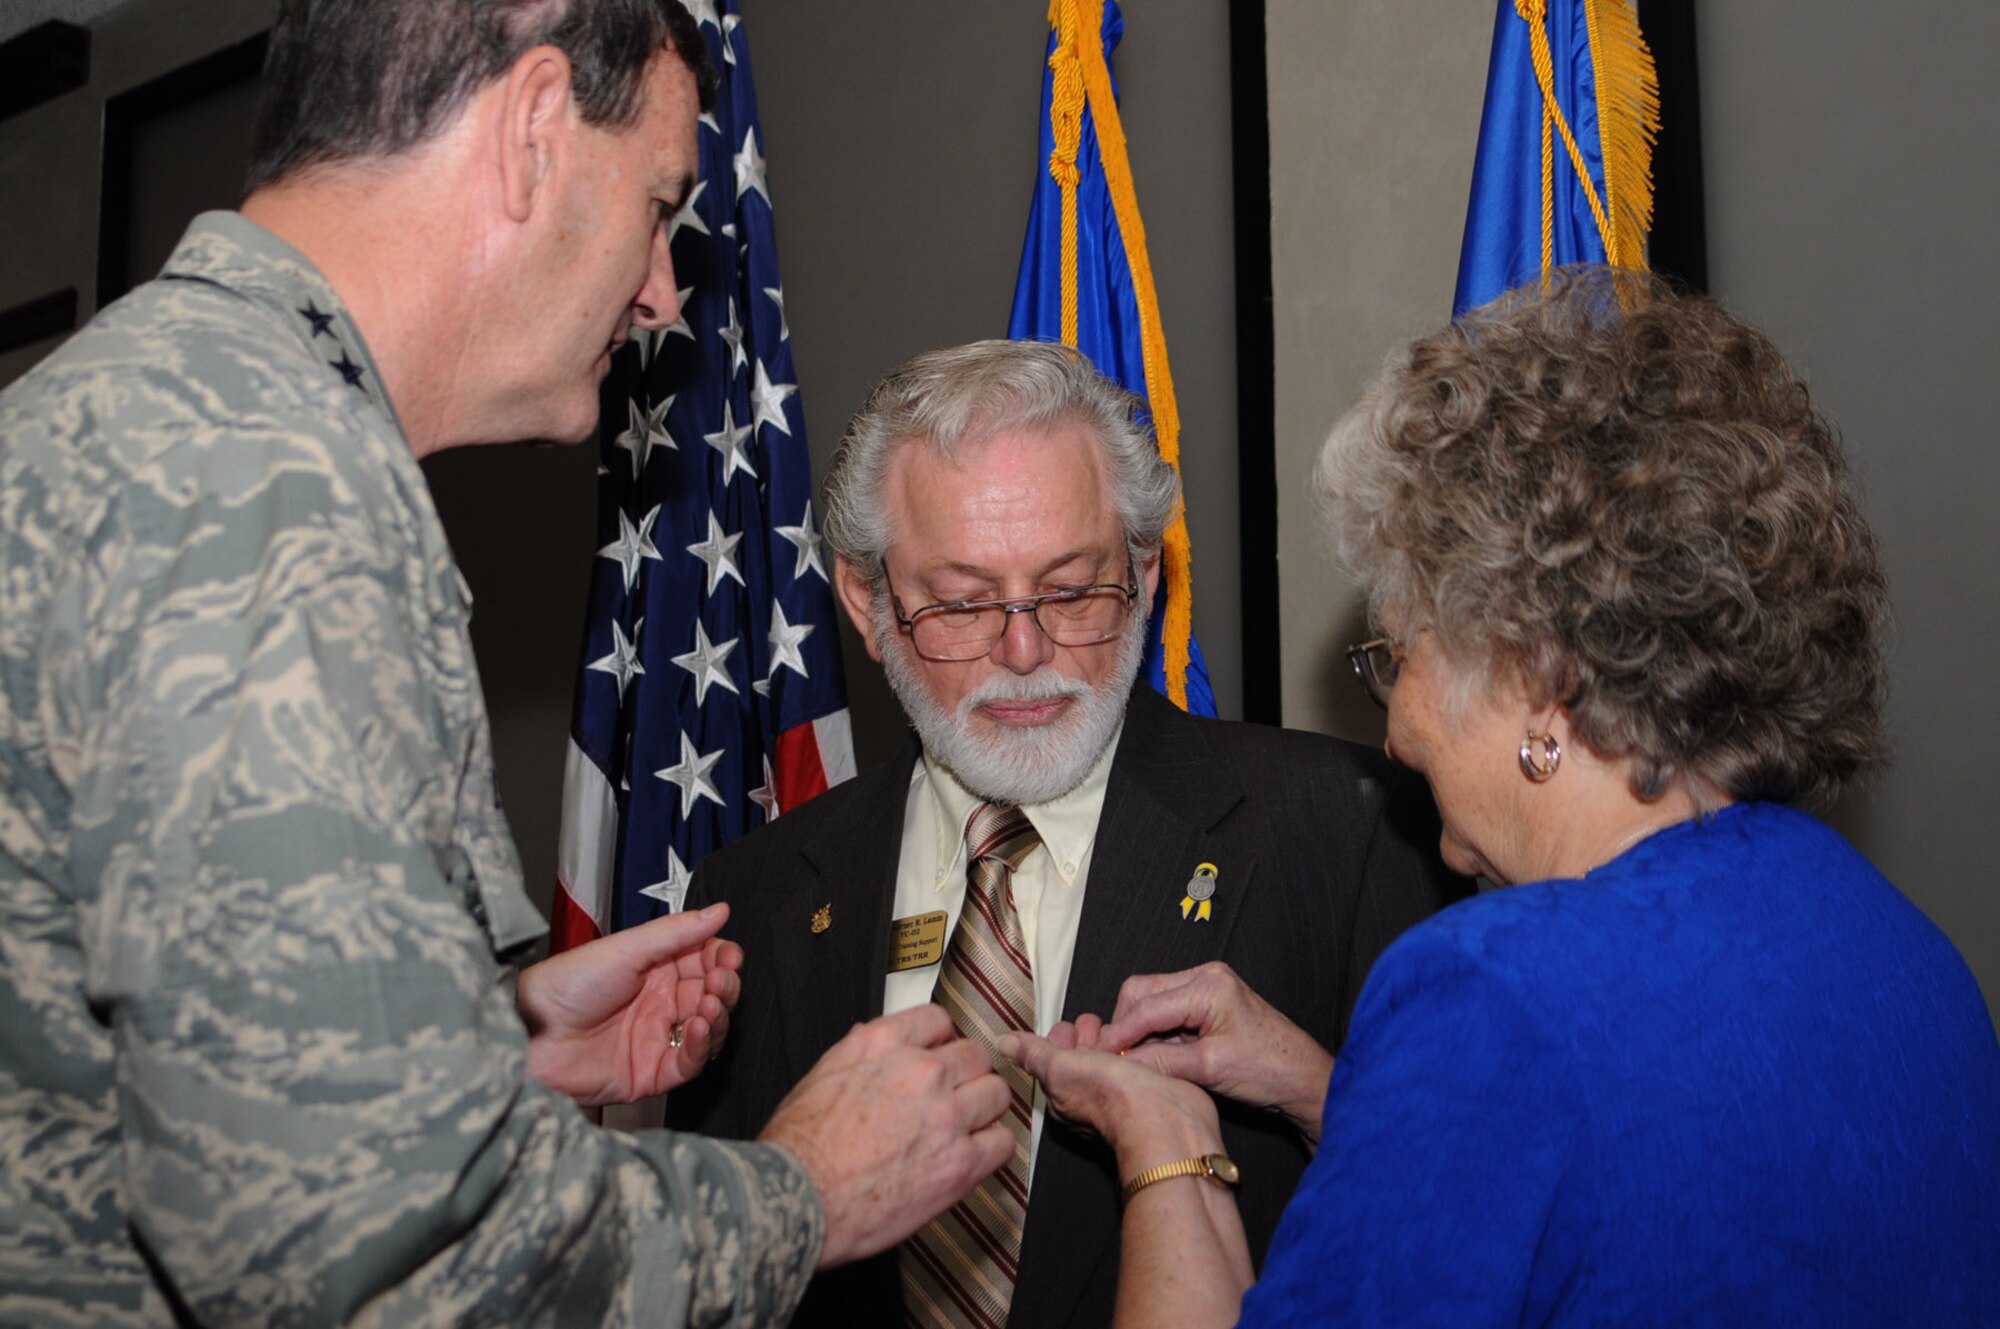 Gen. Stephen Lorenz, left, former commander of Air Education and Training Command, presents Mr. Lamm a pin recognizing 50 years of federal service during the general’s visit to Keesler, Aug. 21, 2008. Also pictured is Mr. Lamm’s wife, Barbara Ann.  (U.S. Air Force photo by Kemberly Groue)